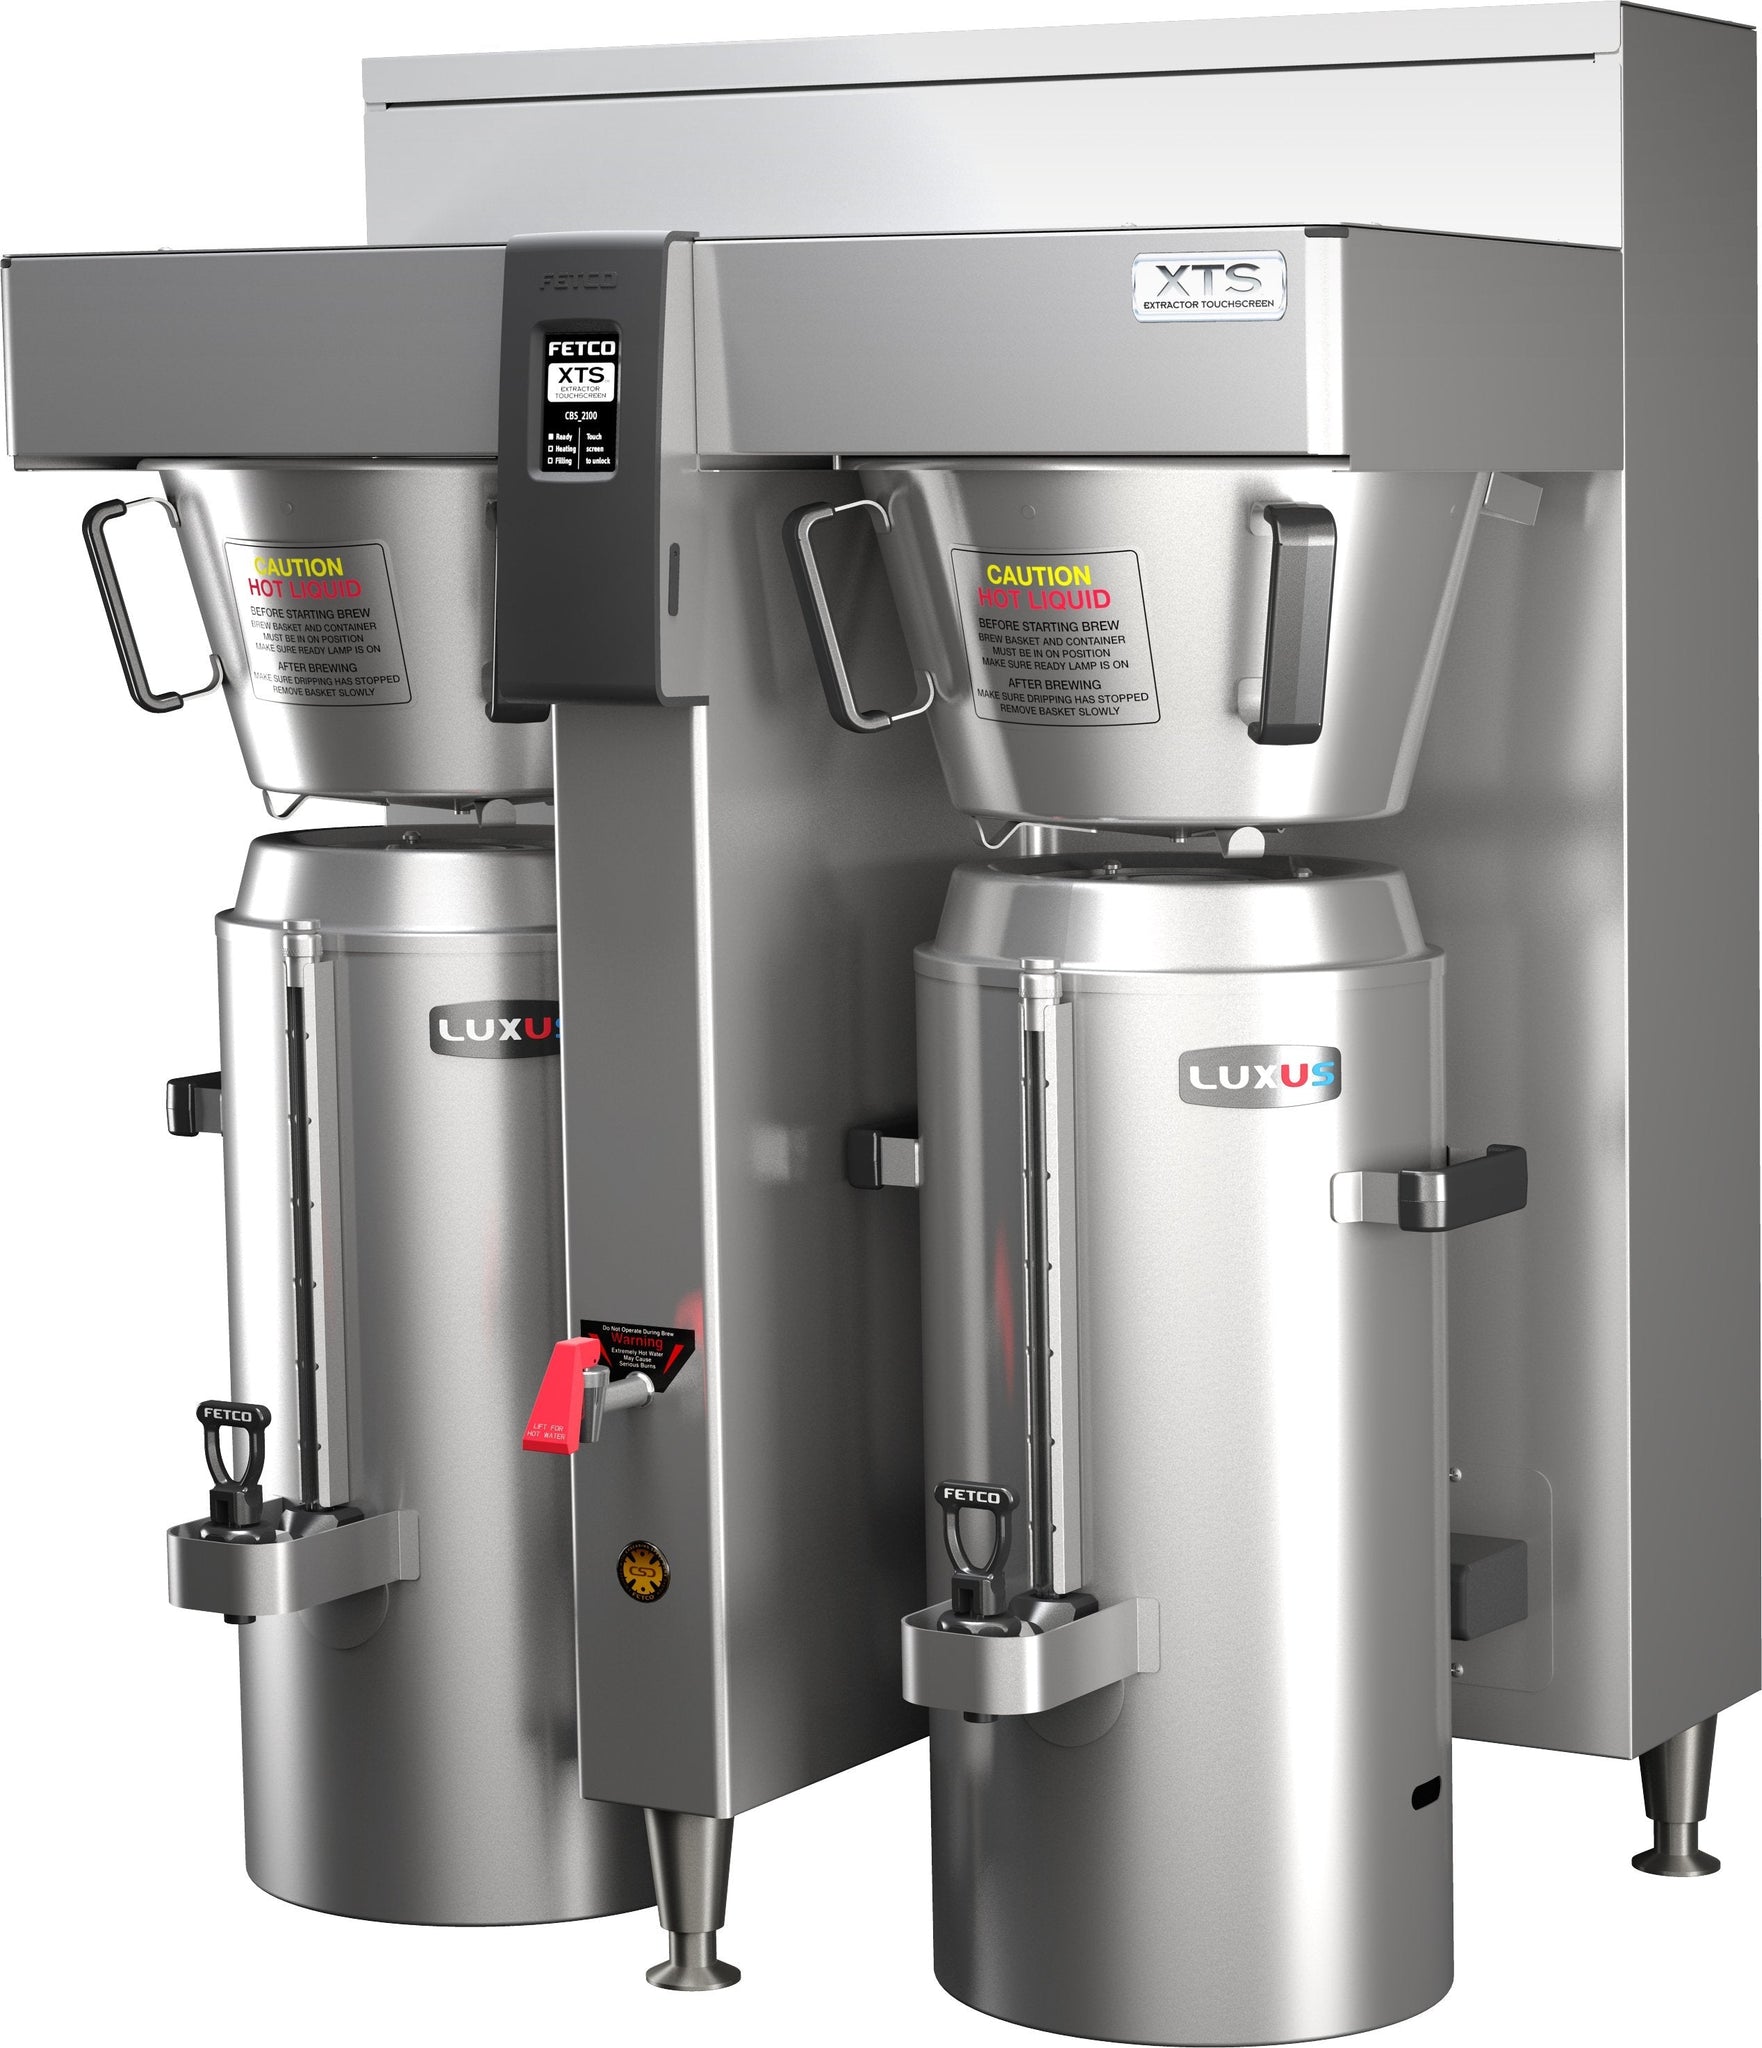 Fetco - Touchscreen Series Coffee Brewer Double Station 6 x 3 kW 440-480V - CBS-2162XTS